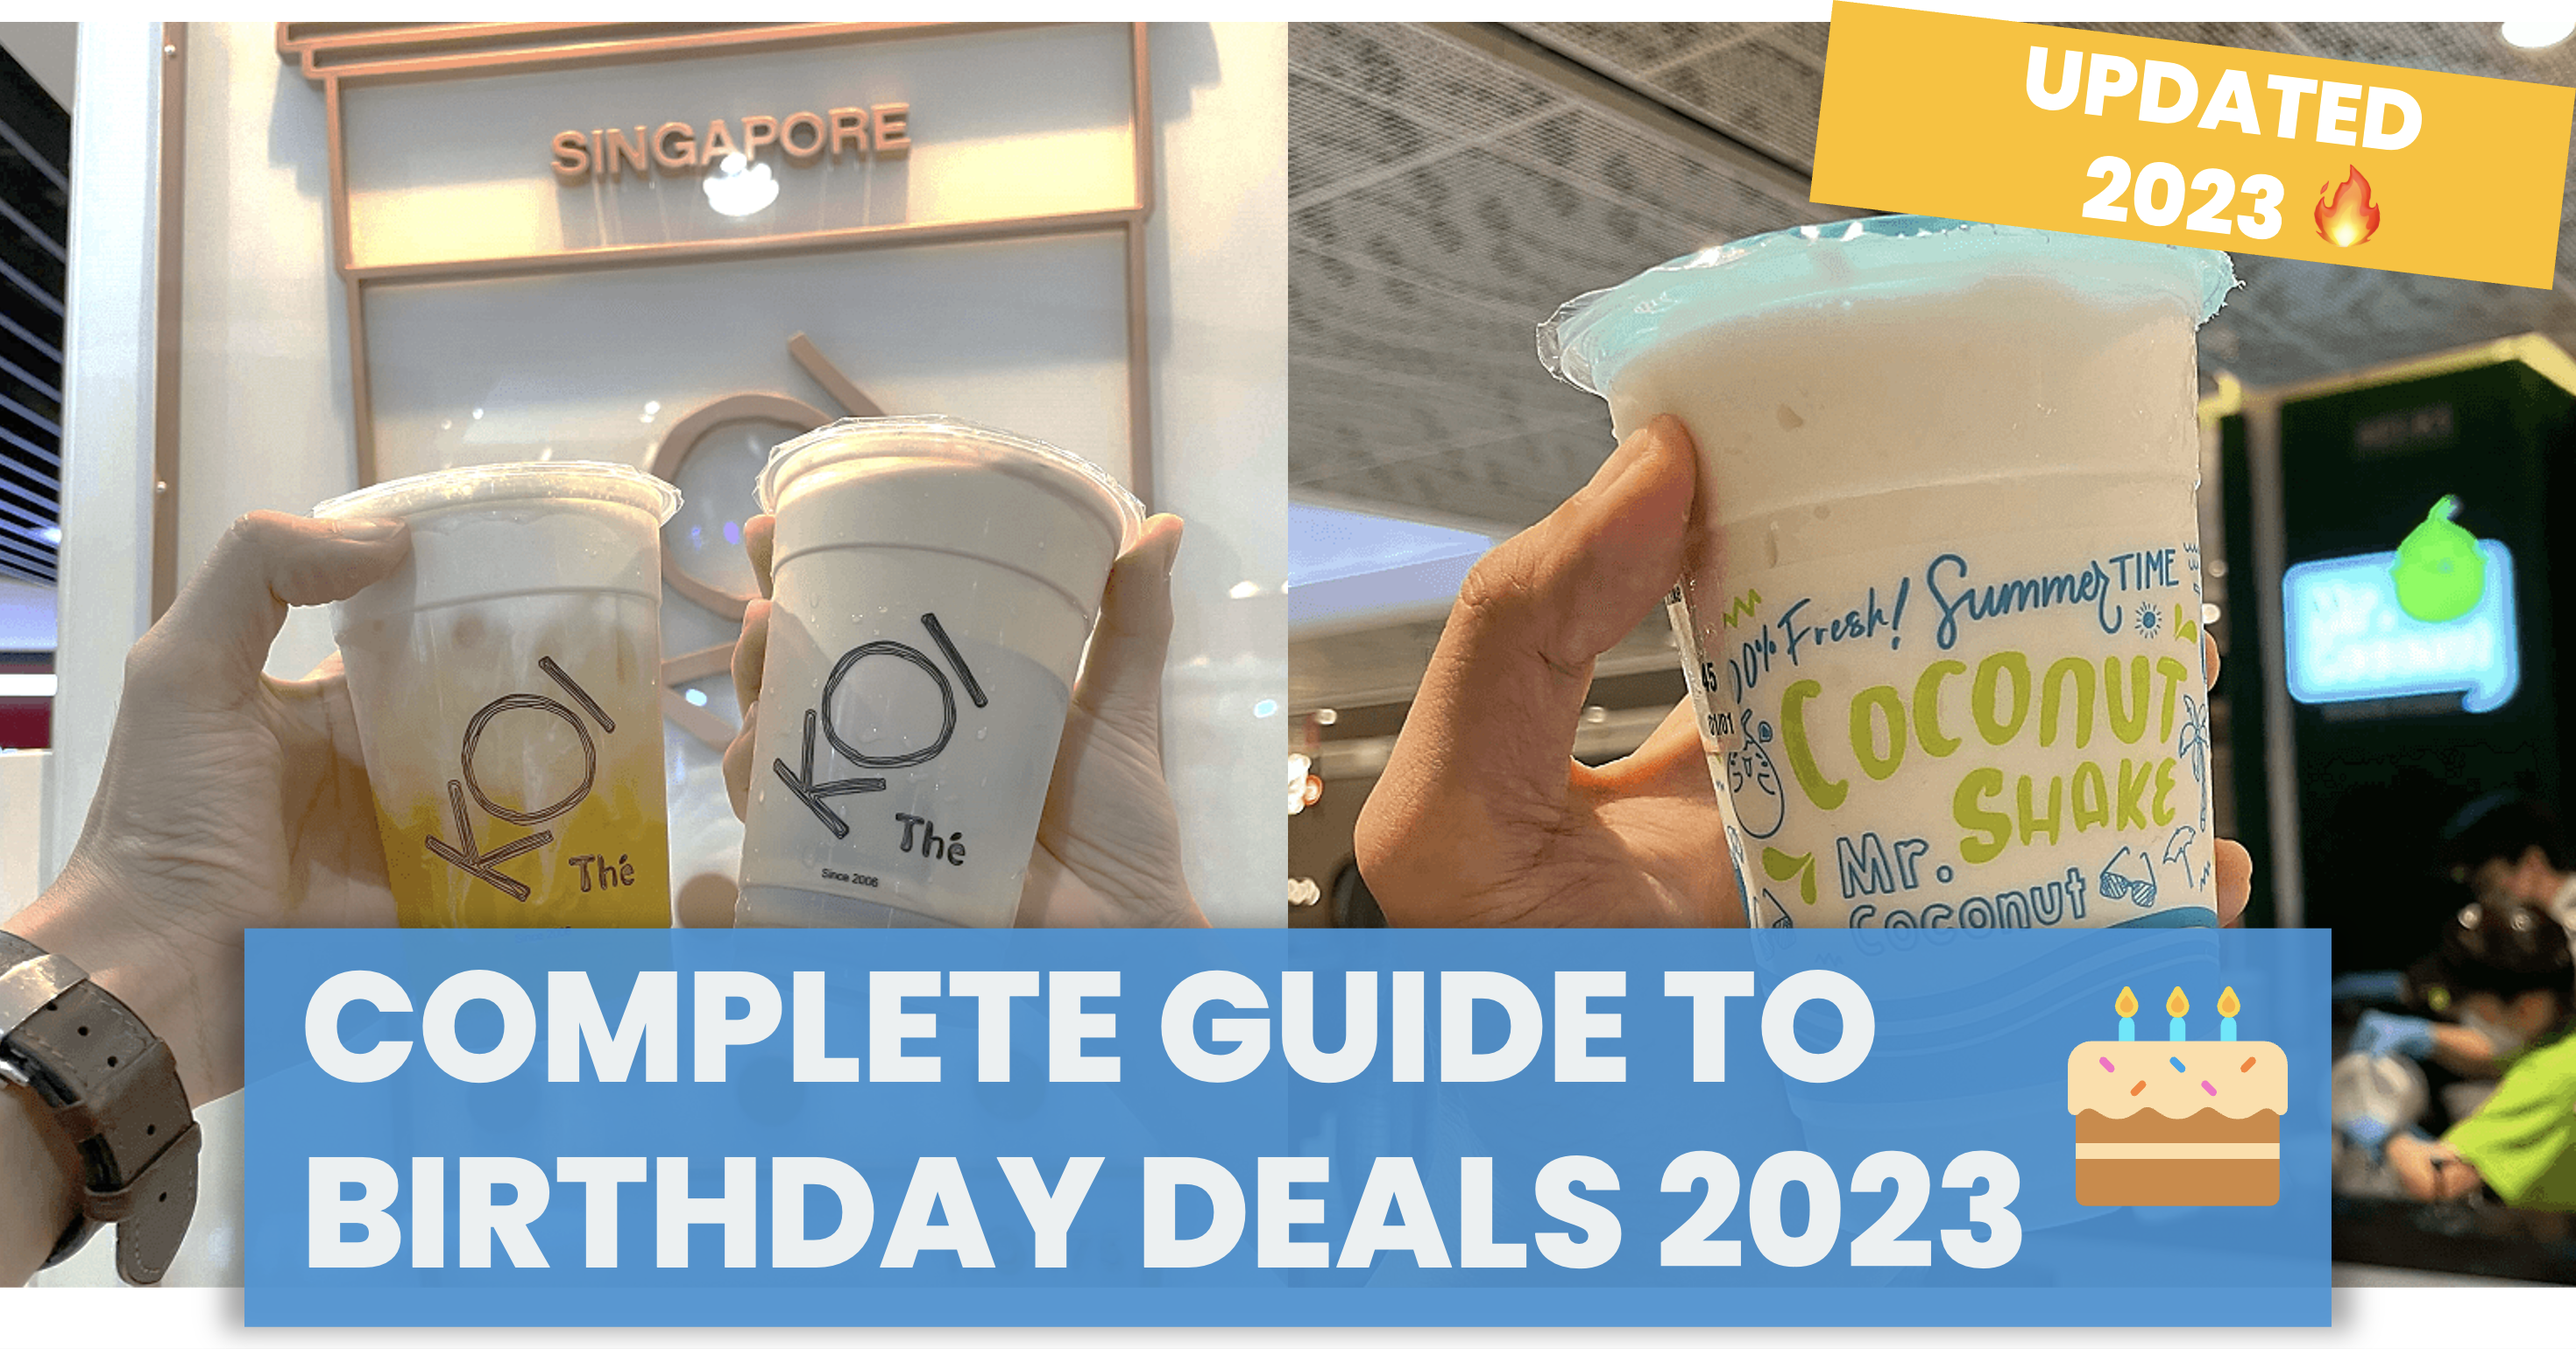 Complete Guide to Birthday deals and treats in Singapore – Updated August 2023